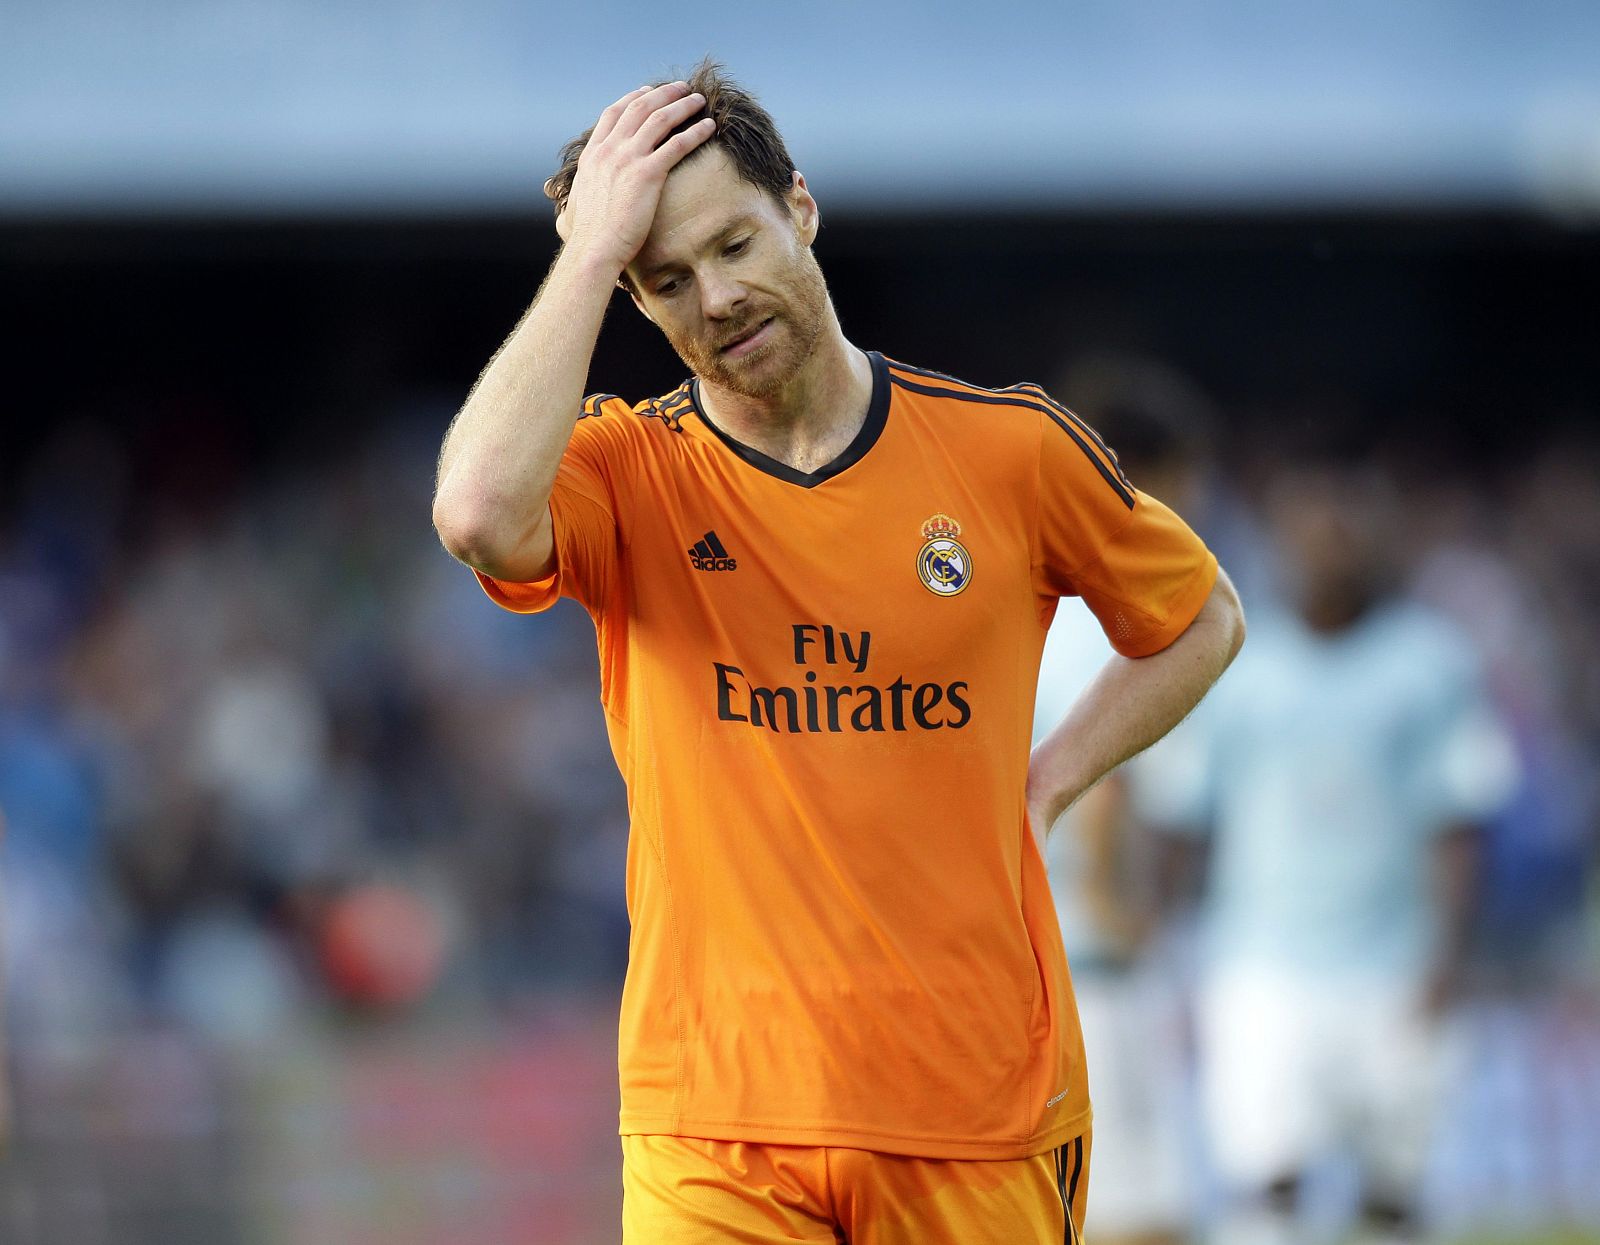 Real Madrid's Alonso reacts during their Spanish first division soccer match against Celta Vigo at the Balaidos stadium in Vigo